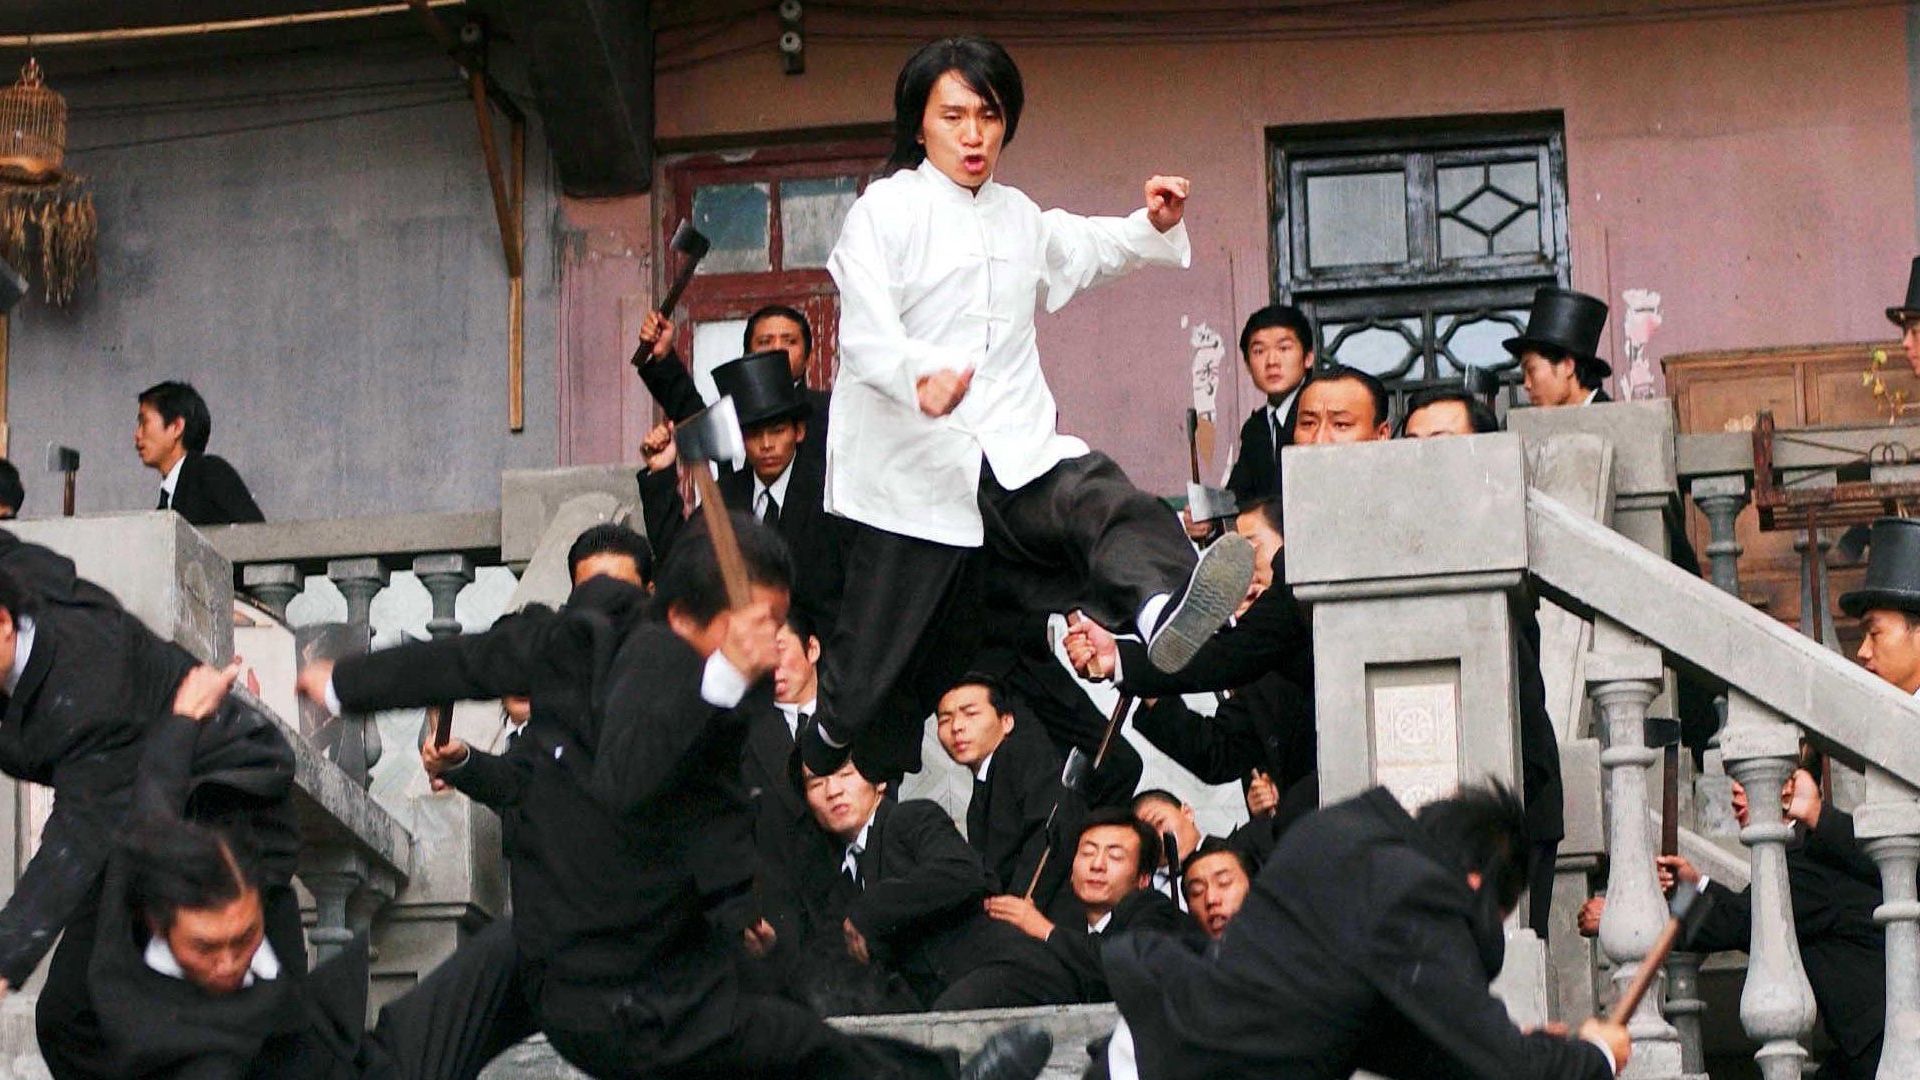 The Kung Fu Hustle Sequel May Be More of a Spiritual Successor than an Actual Sequel